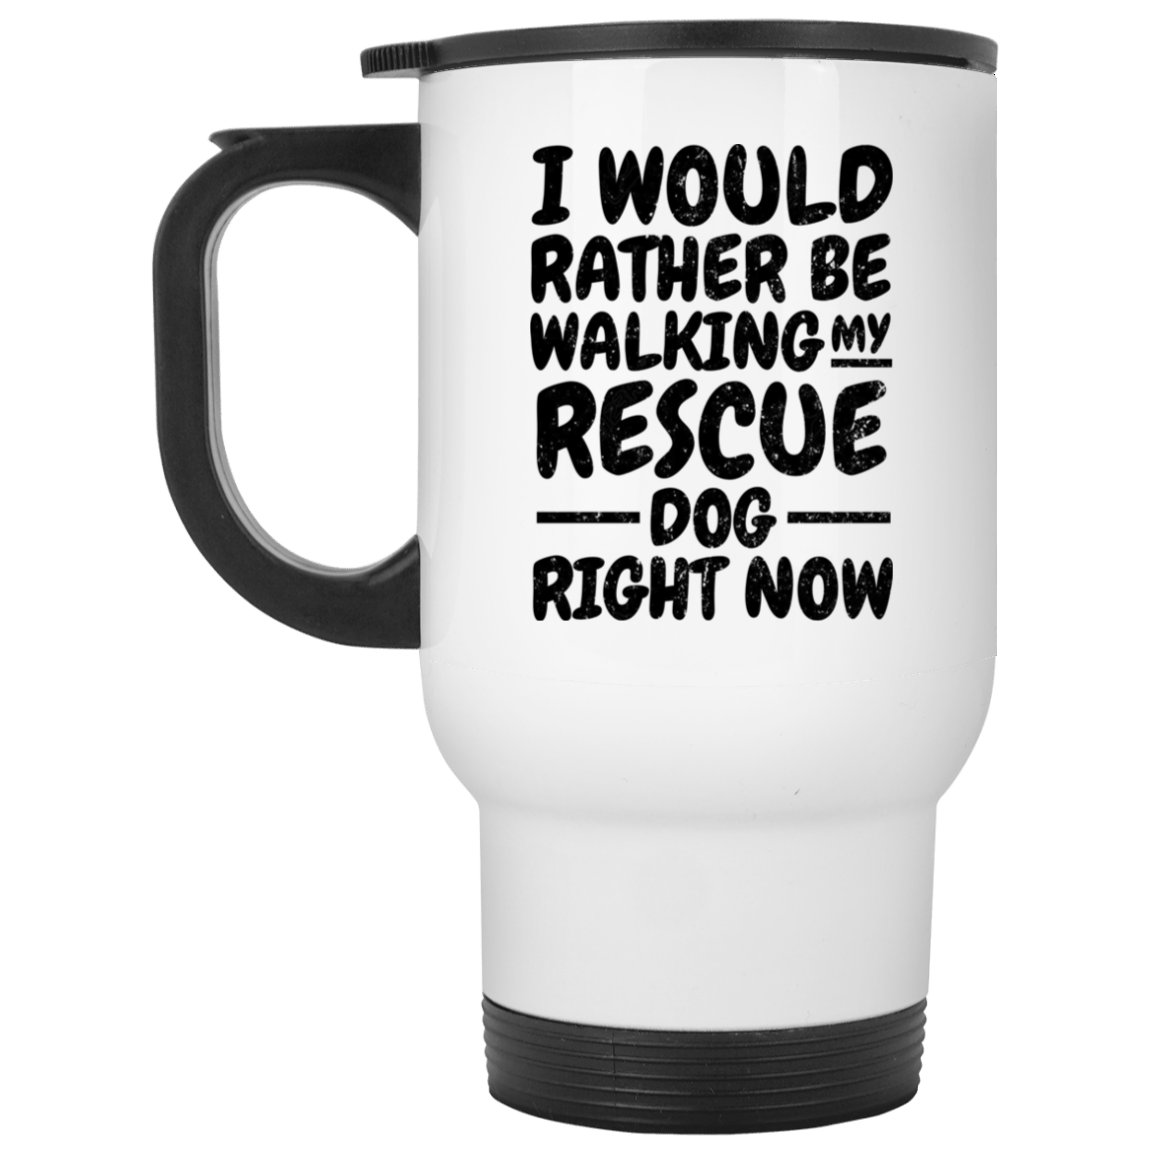 I Would Rather Be - Mugs.